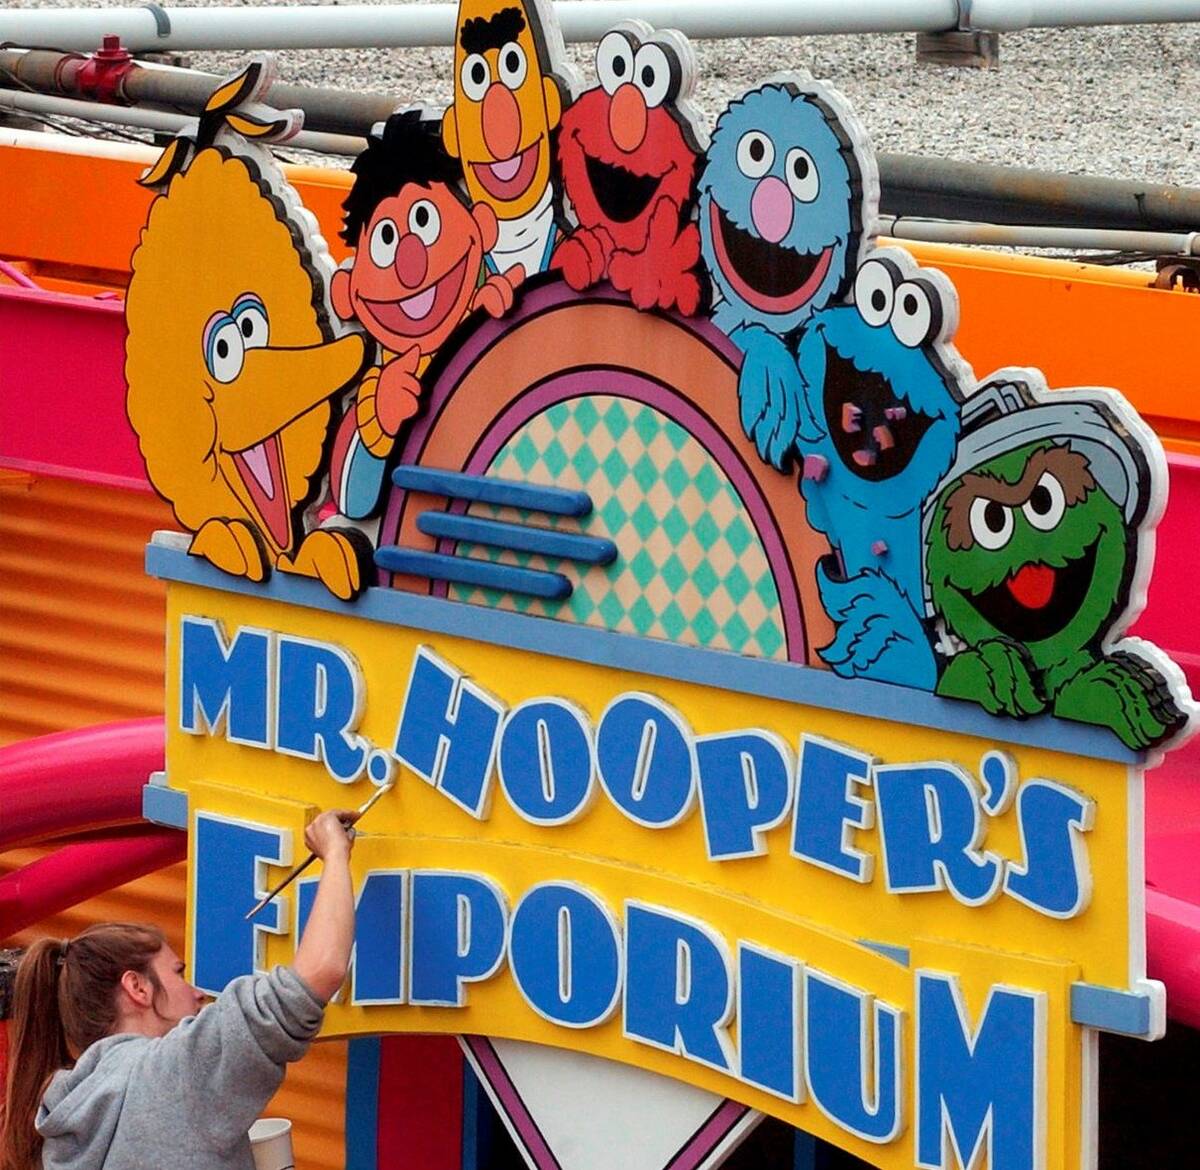 Tessa Meier puts some new paint on the sign outside Mr. Hooper's Emporium to get ready for open ...